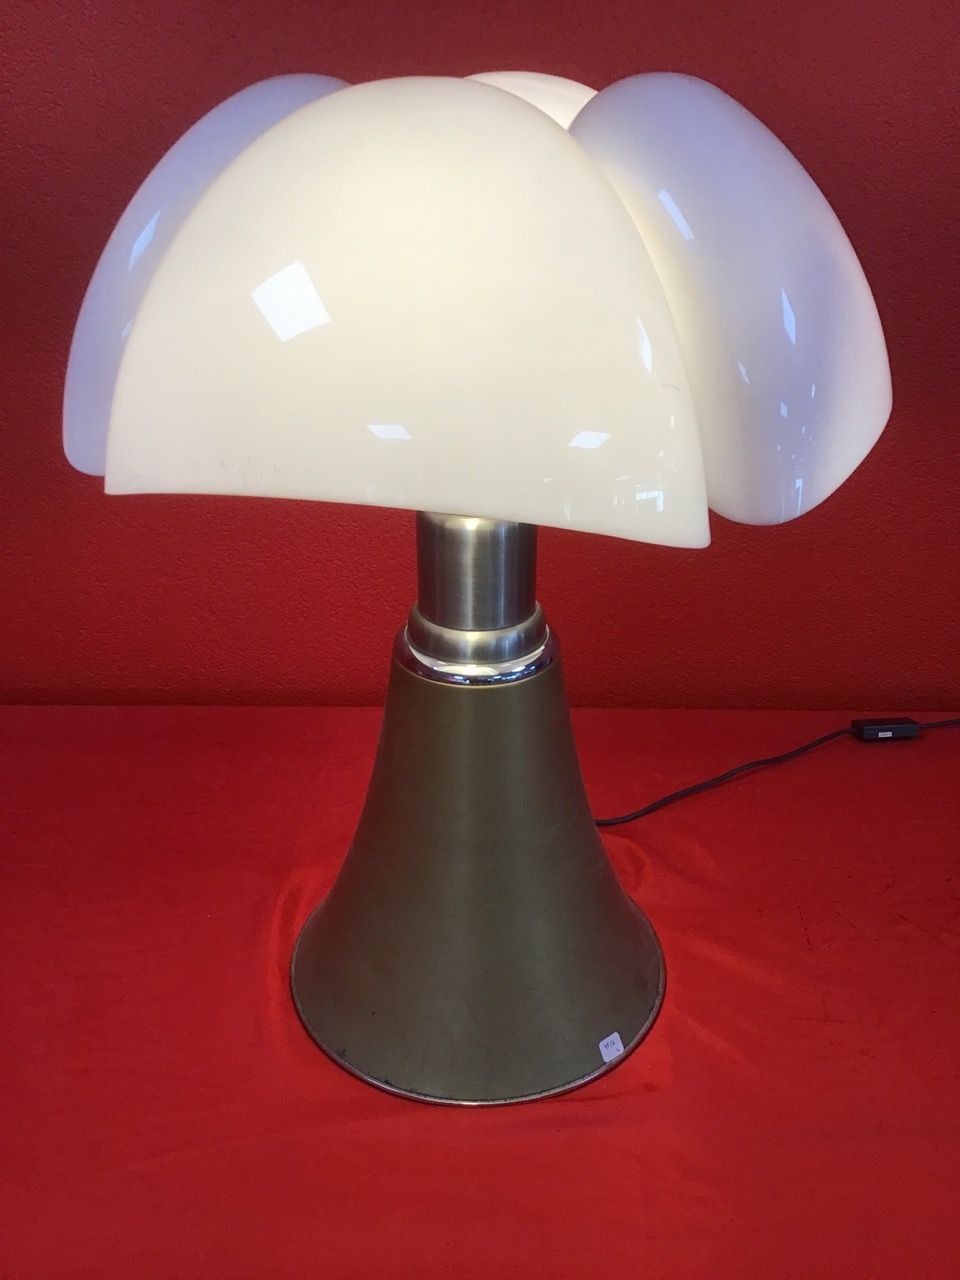 Null Pipistrello lamp by Martinelli

Foot and lampshade with traces of wear but &hellip;